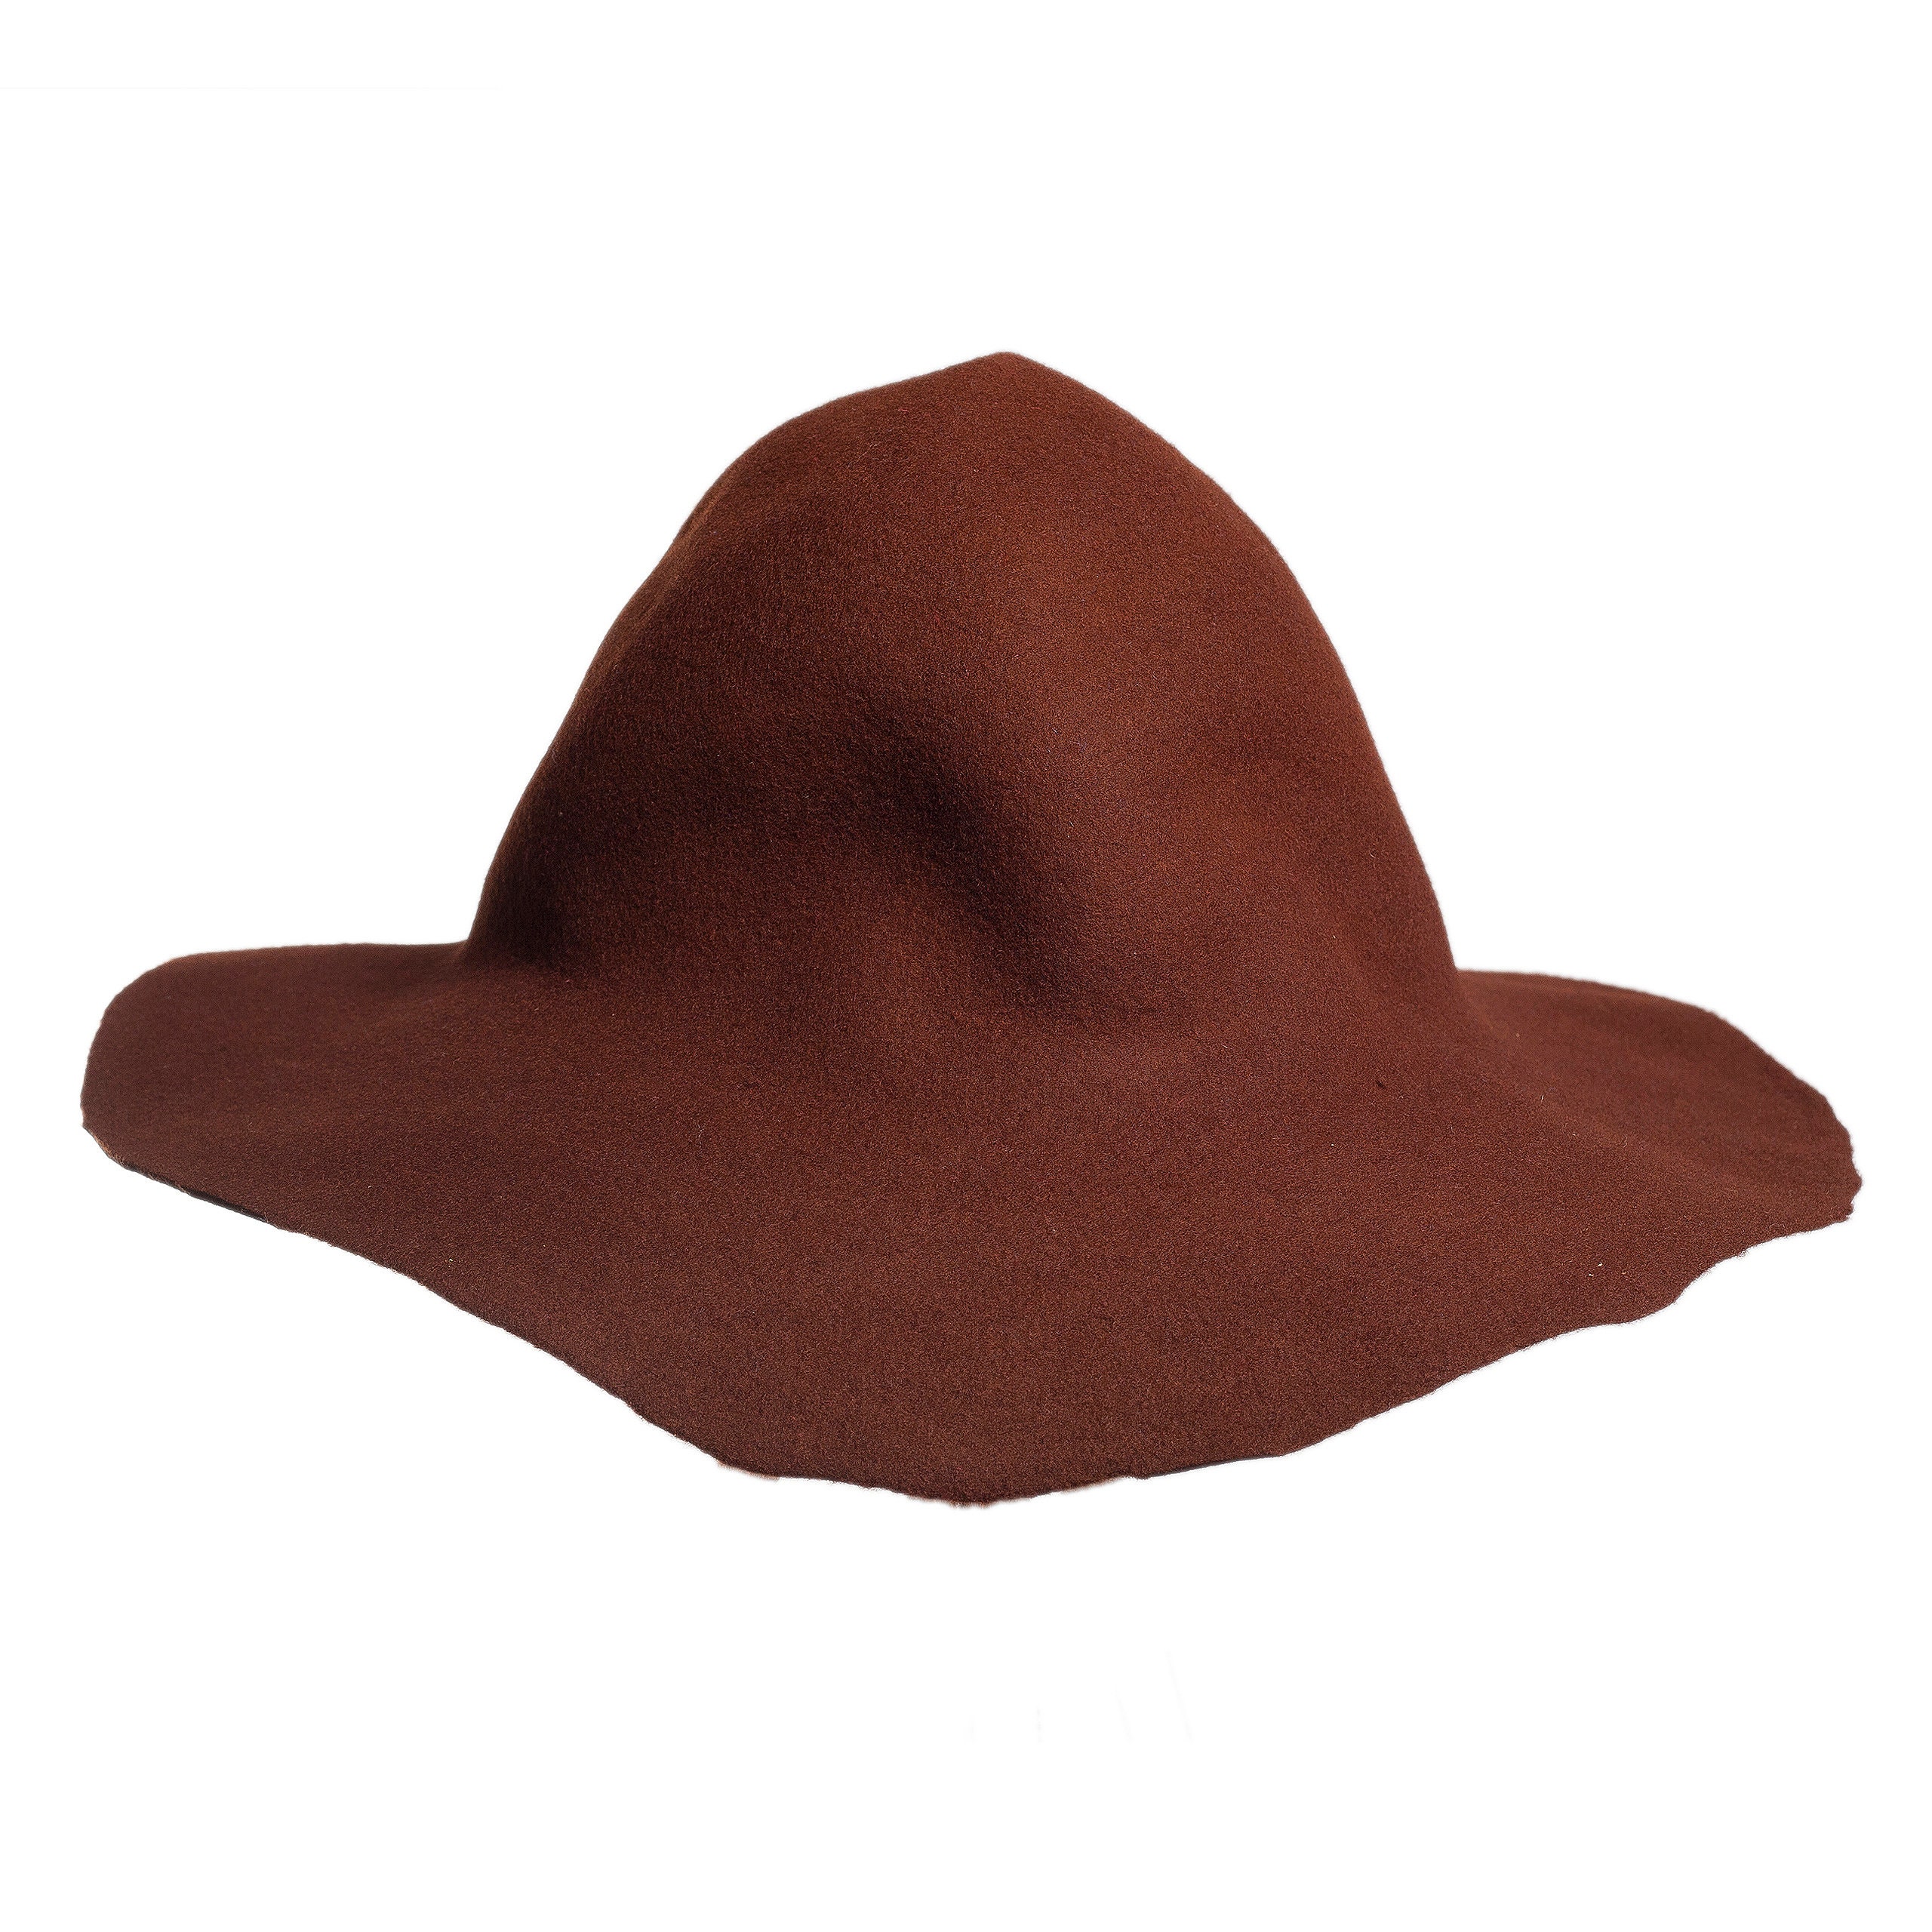 Brown Wool Capeline Felt Hood Colors for Millinery semi-product Hat